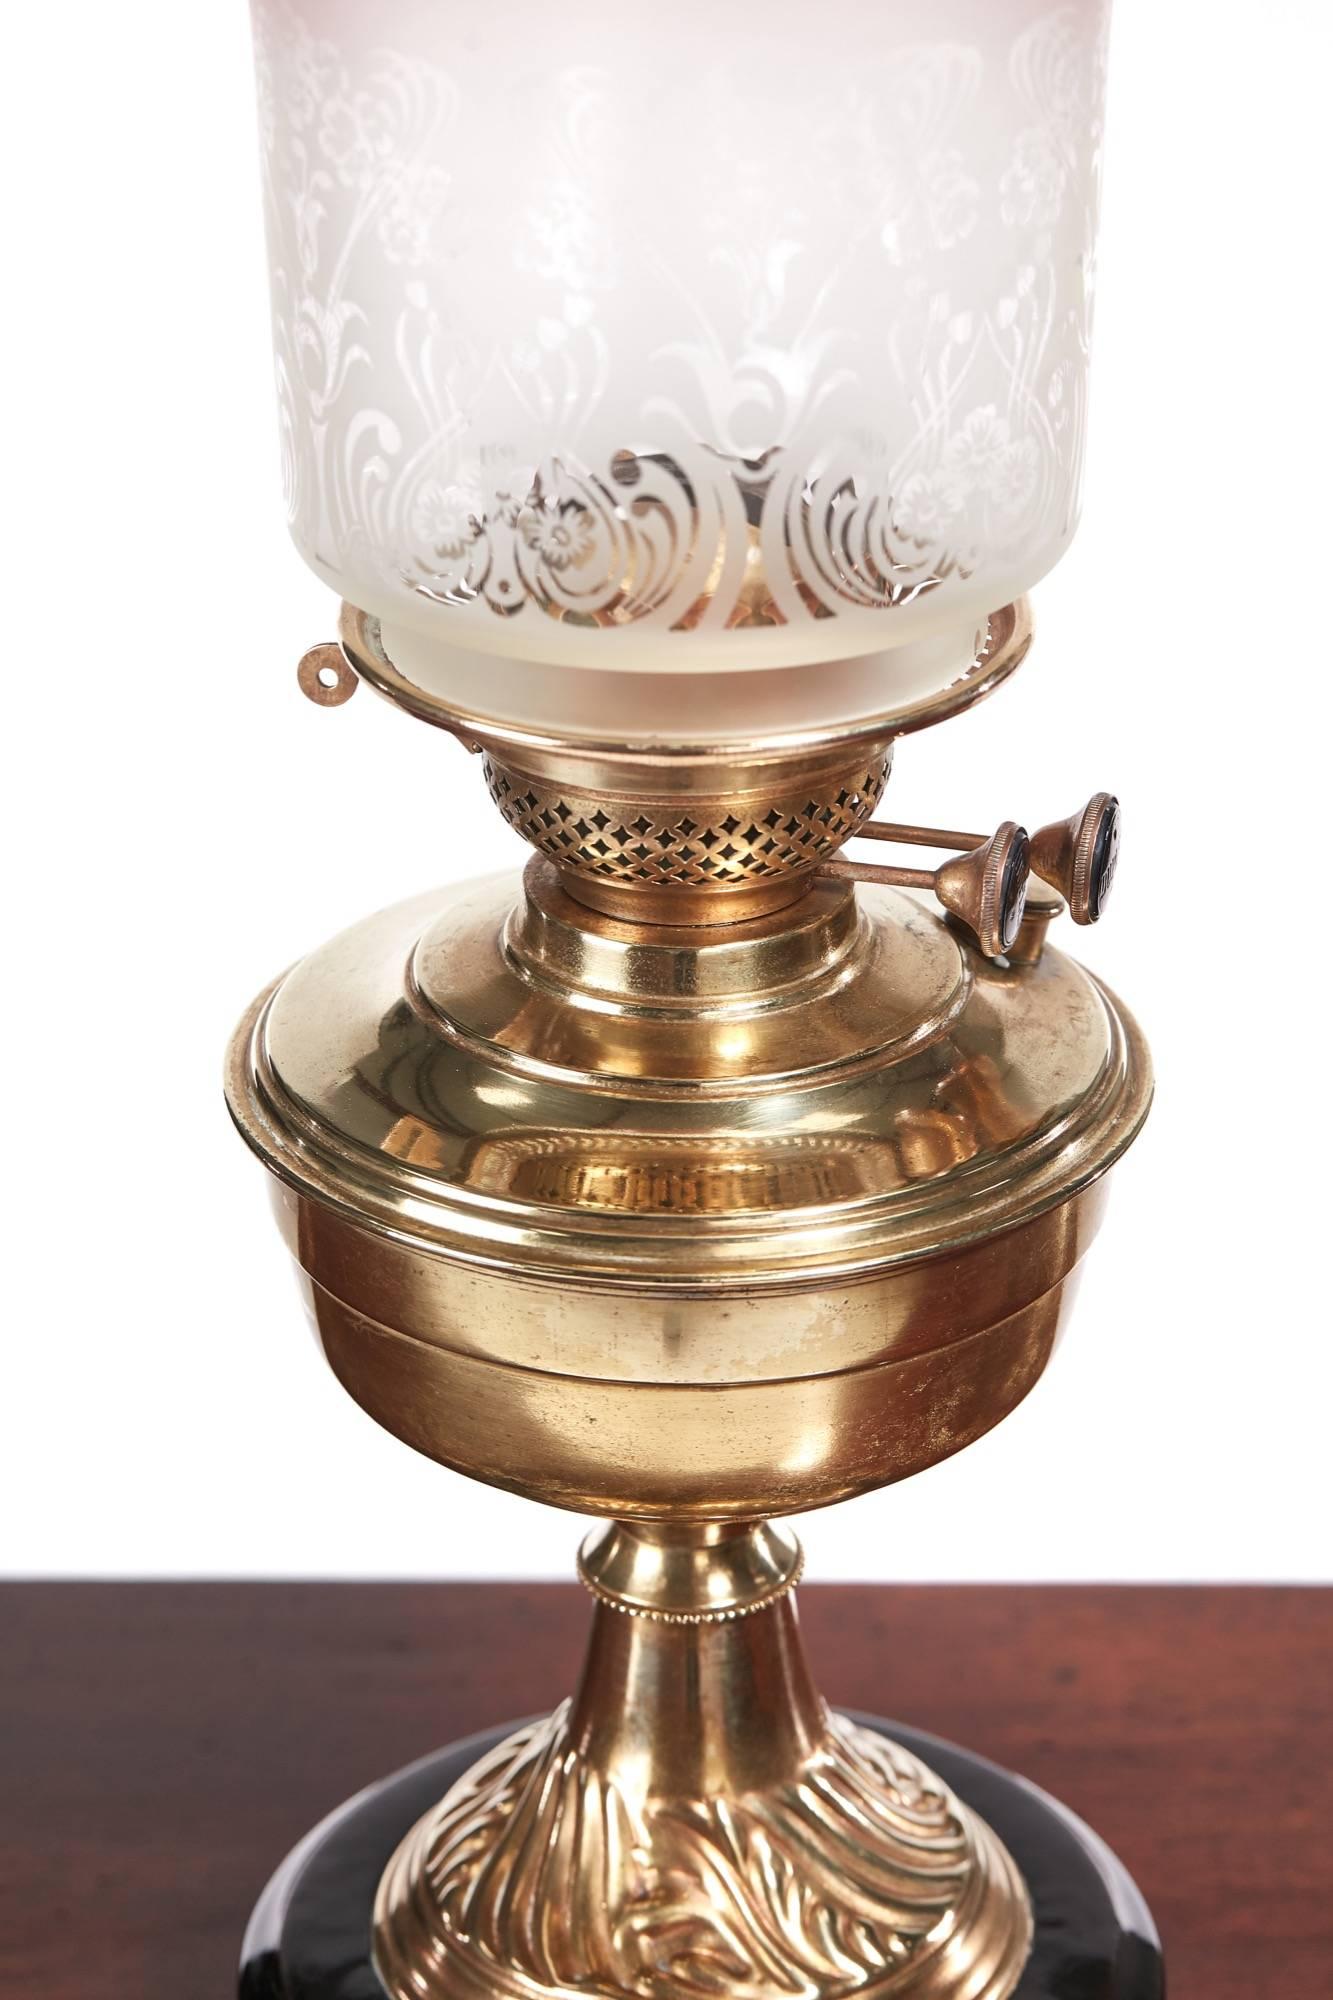 Antique Victorian brass oil lamp with a stepped circular base, brass front and Hinks duplex burner on brass a column with etched pink frilled glass shade,
lovely original condition.
Measures: 7